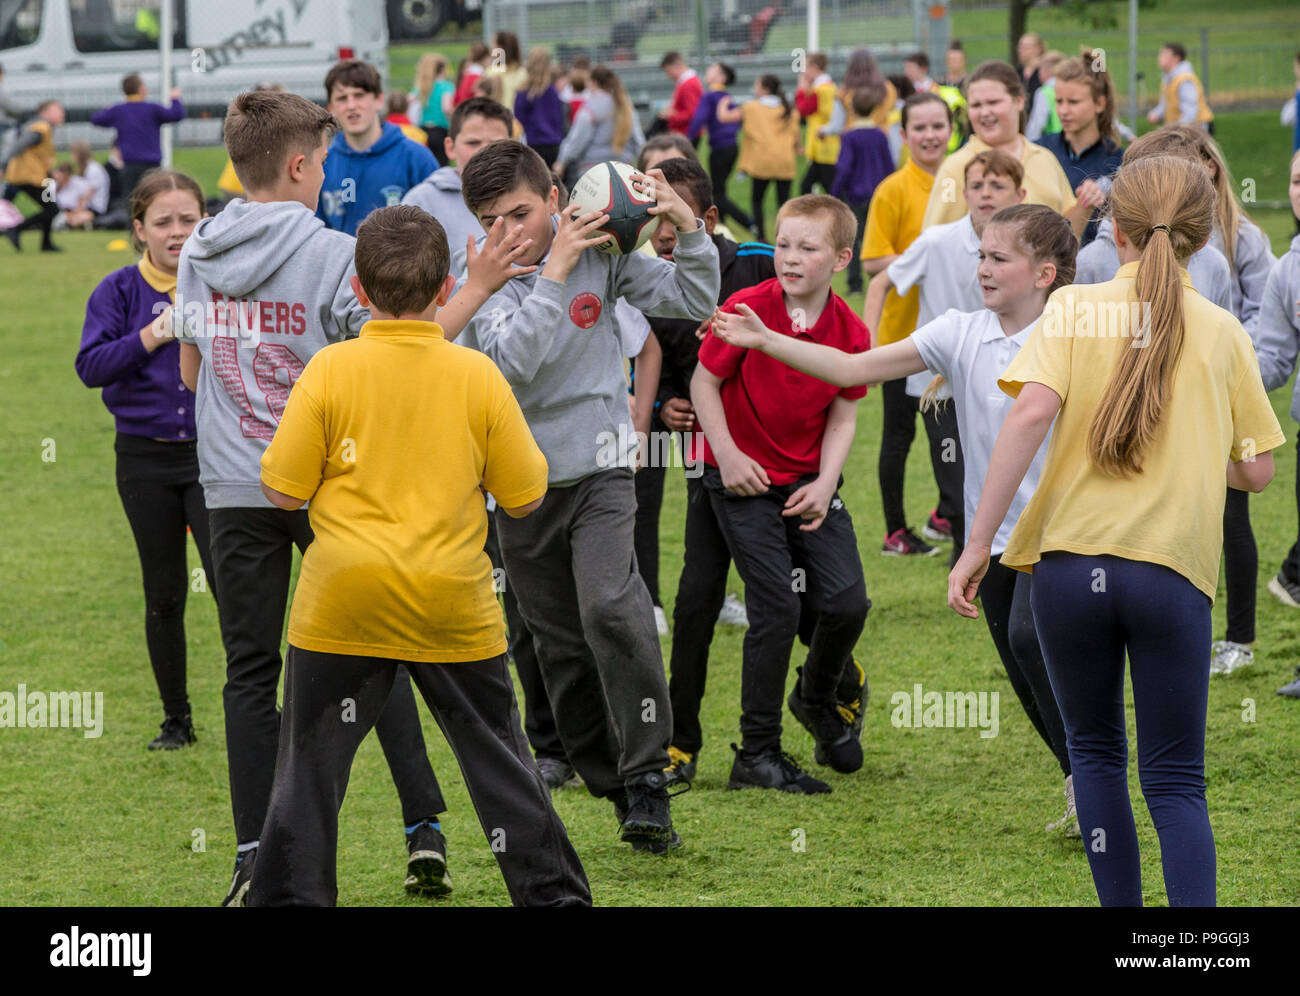 Young people participating in sports Stock Photo